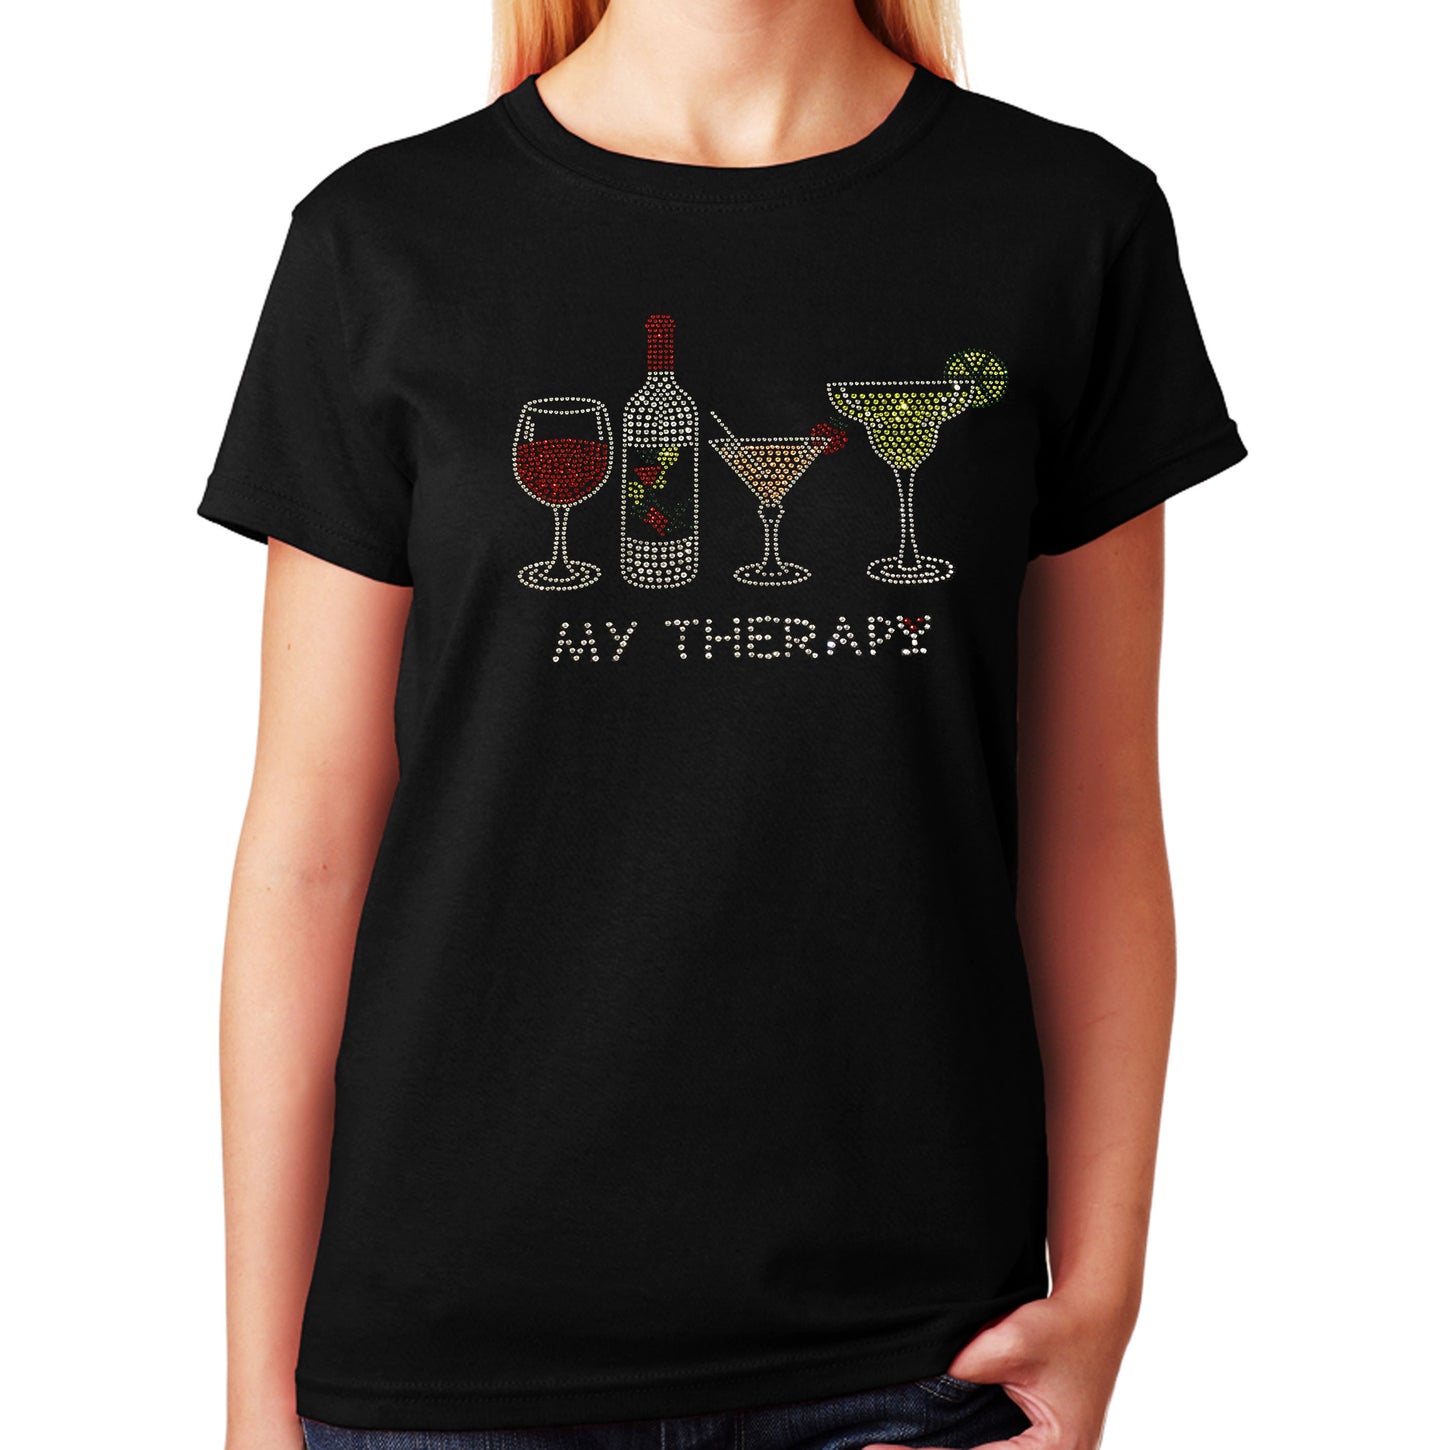 My Therapy - Wine Bottle - Drinks in Rhinestones